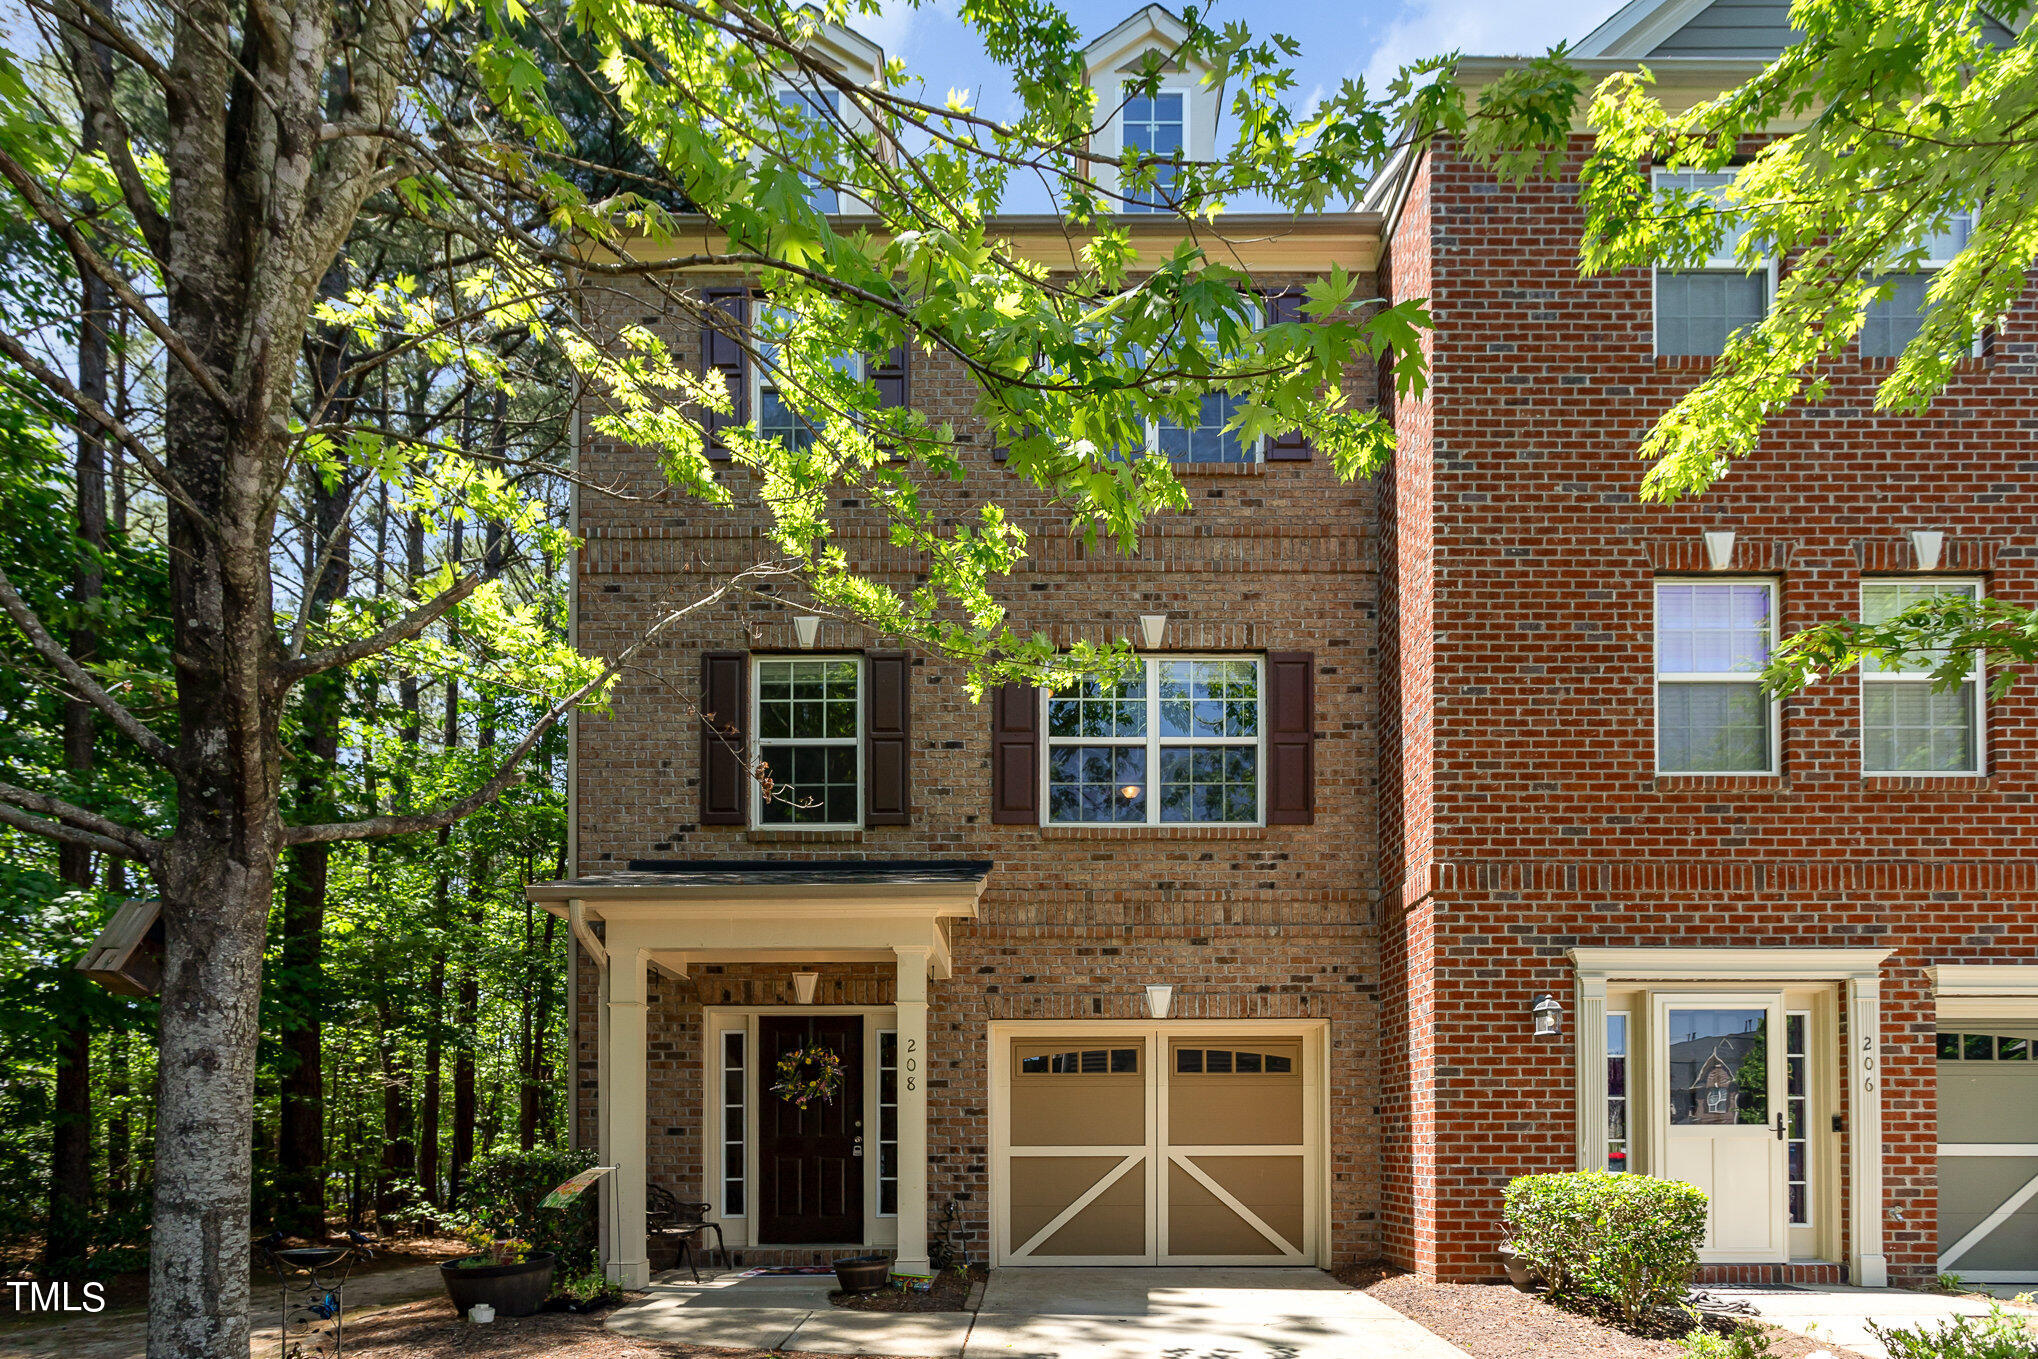 View Apex, NC 27539 townhome